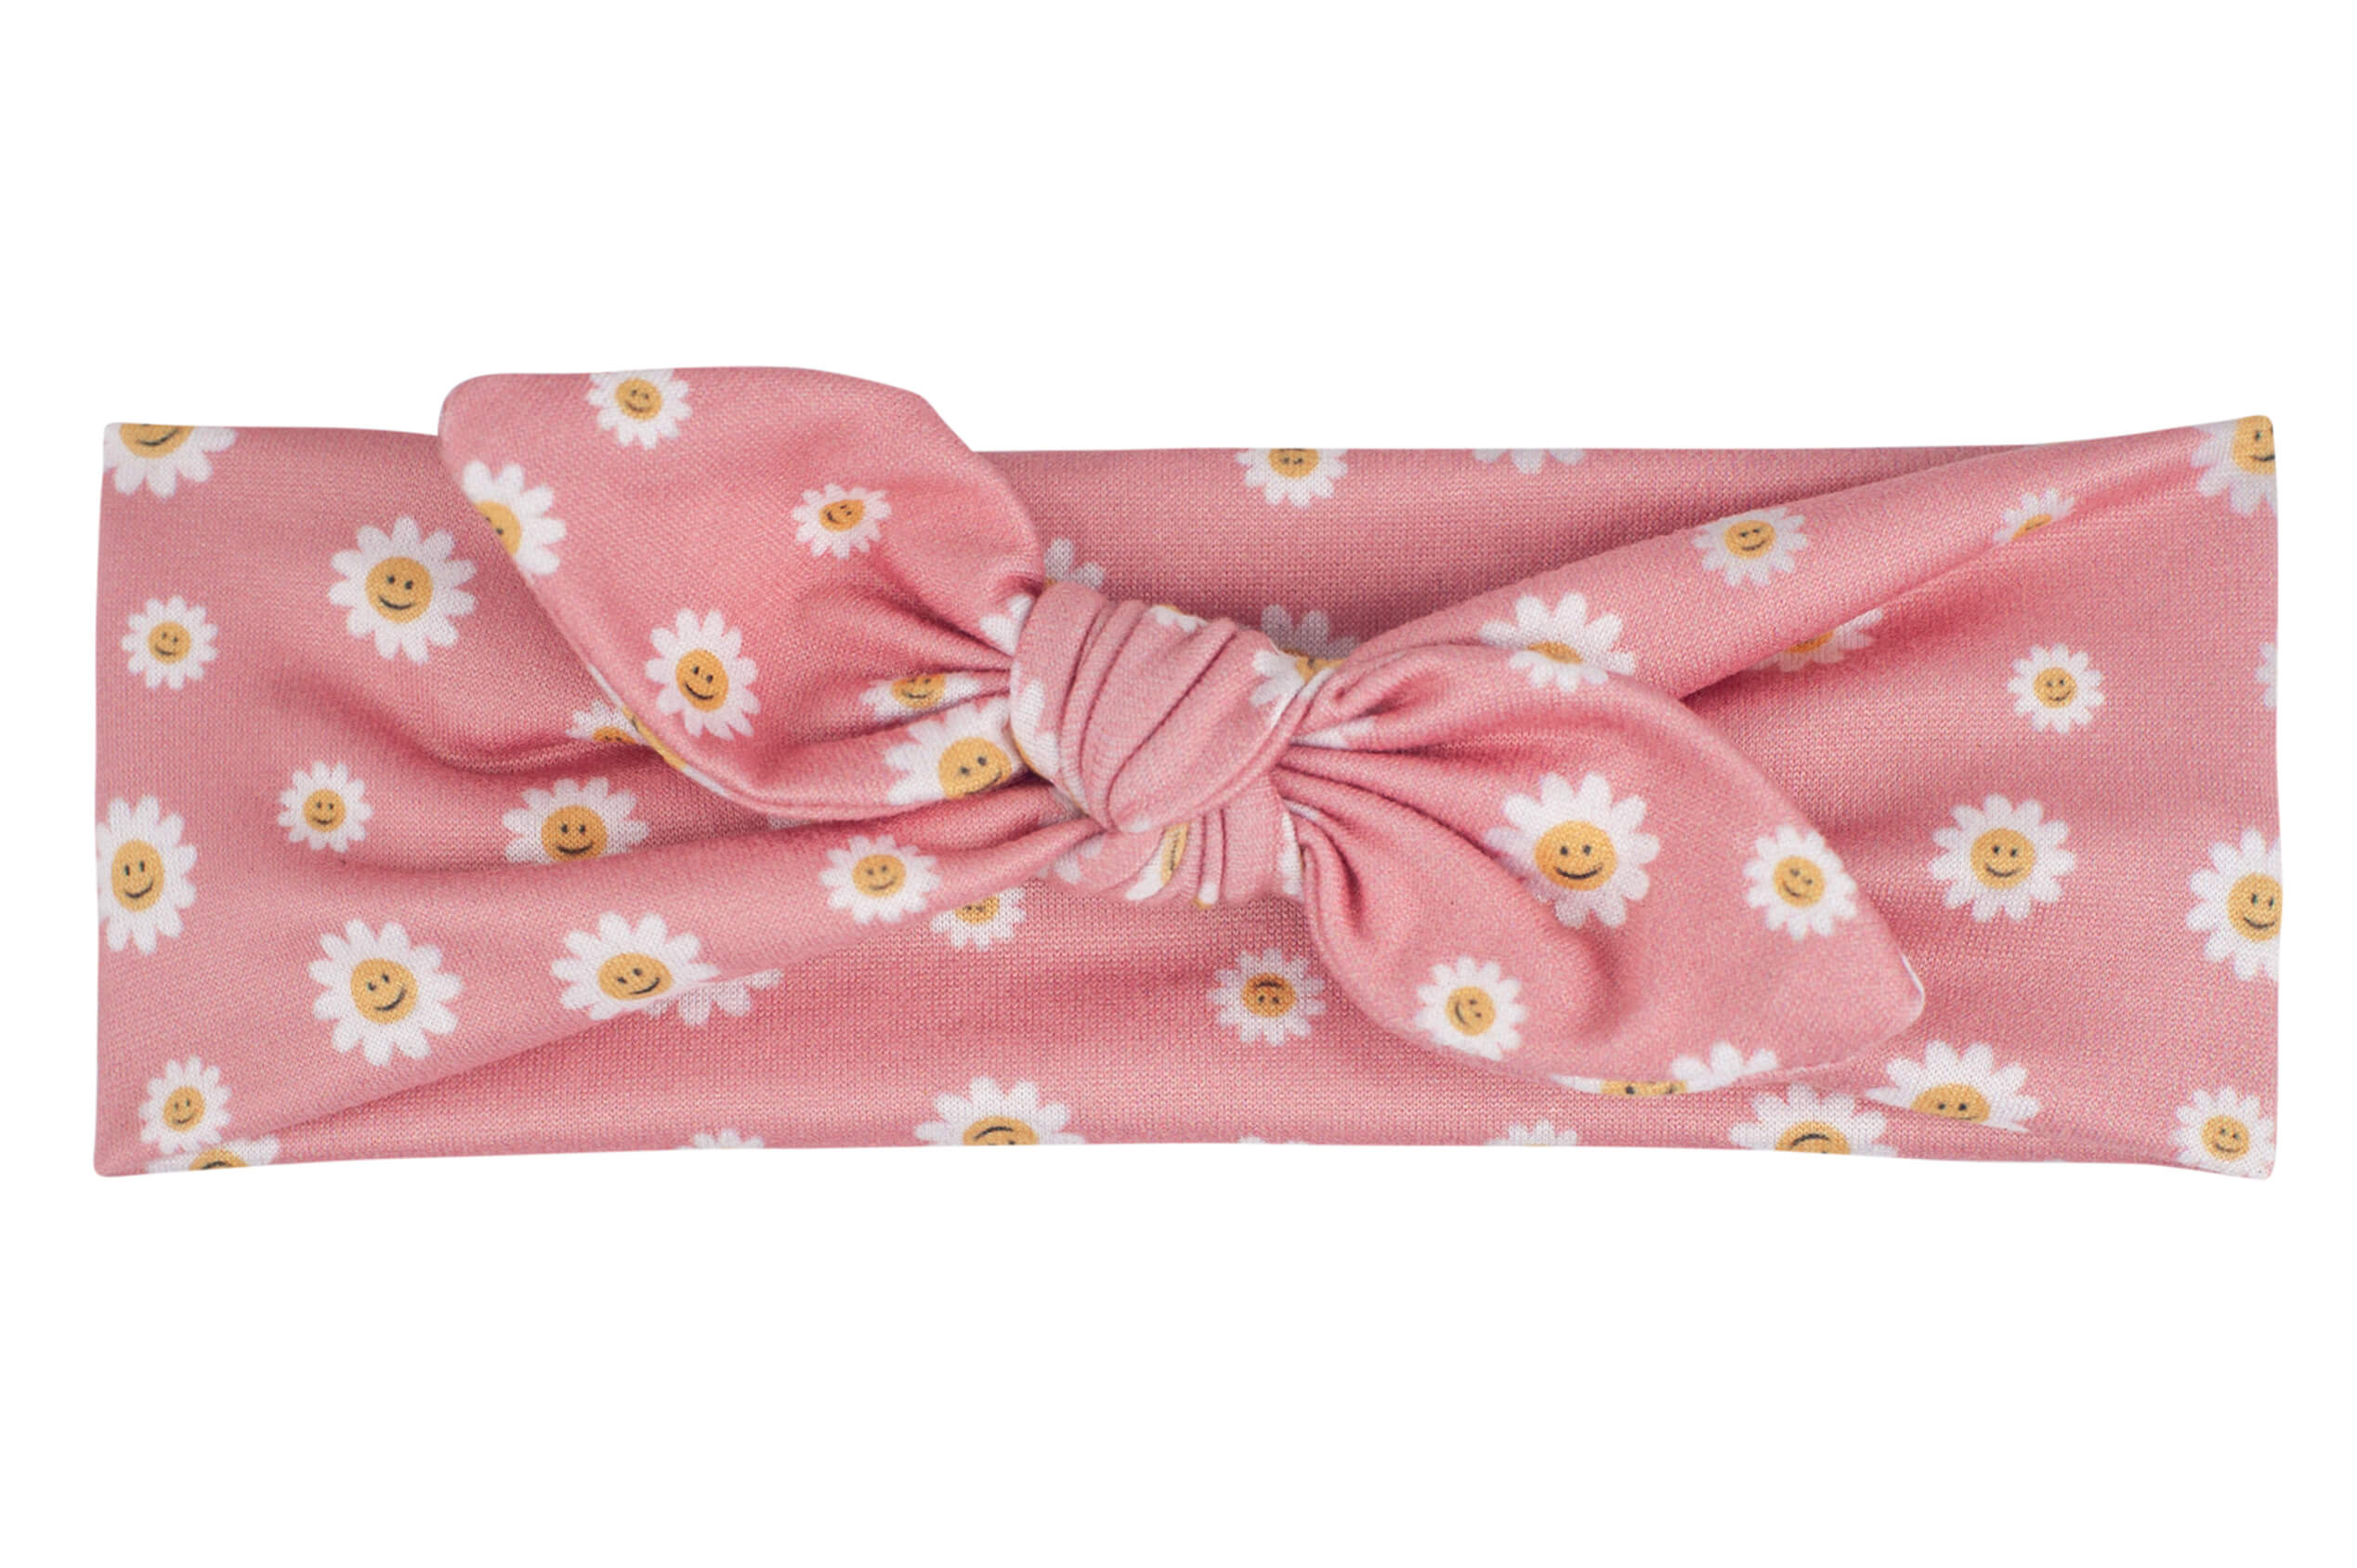 Knotted head wrap featuring a flower pattern for little girls from By Bella Boutique.